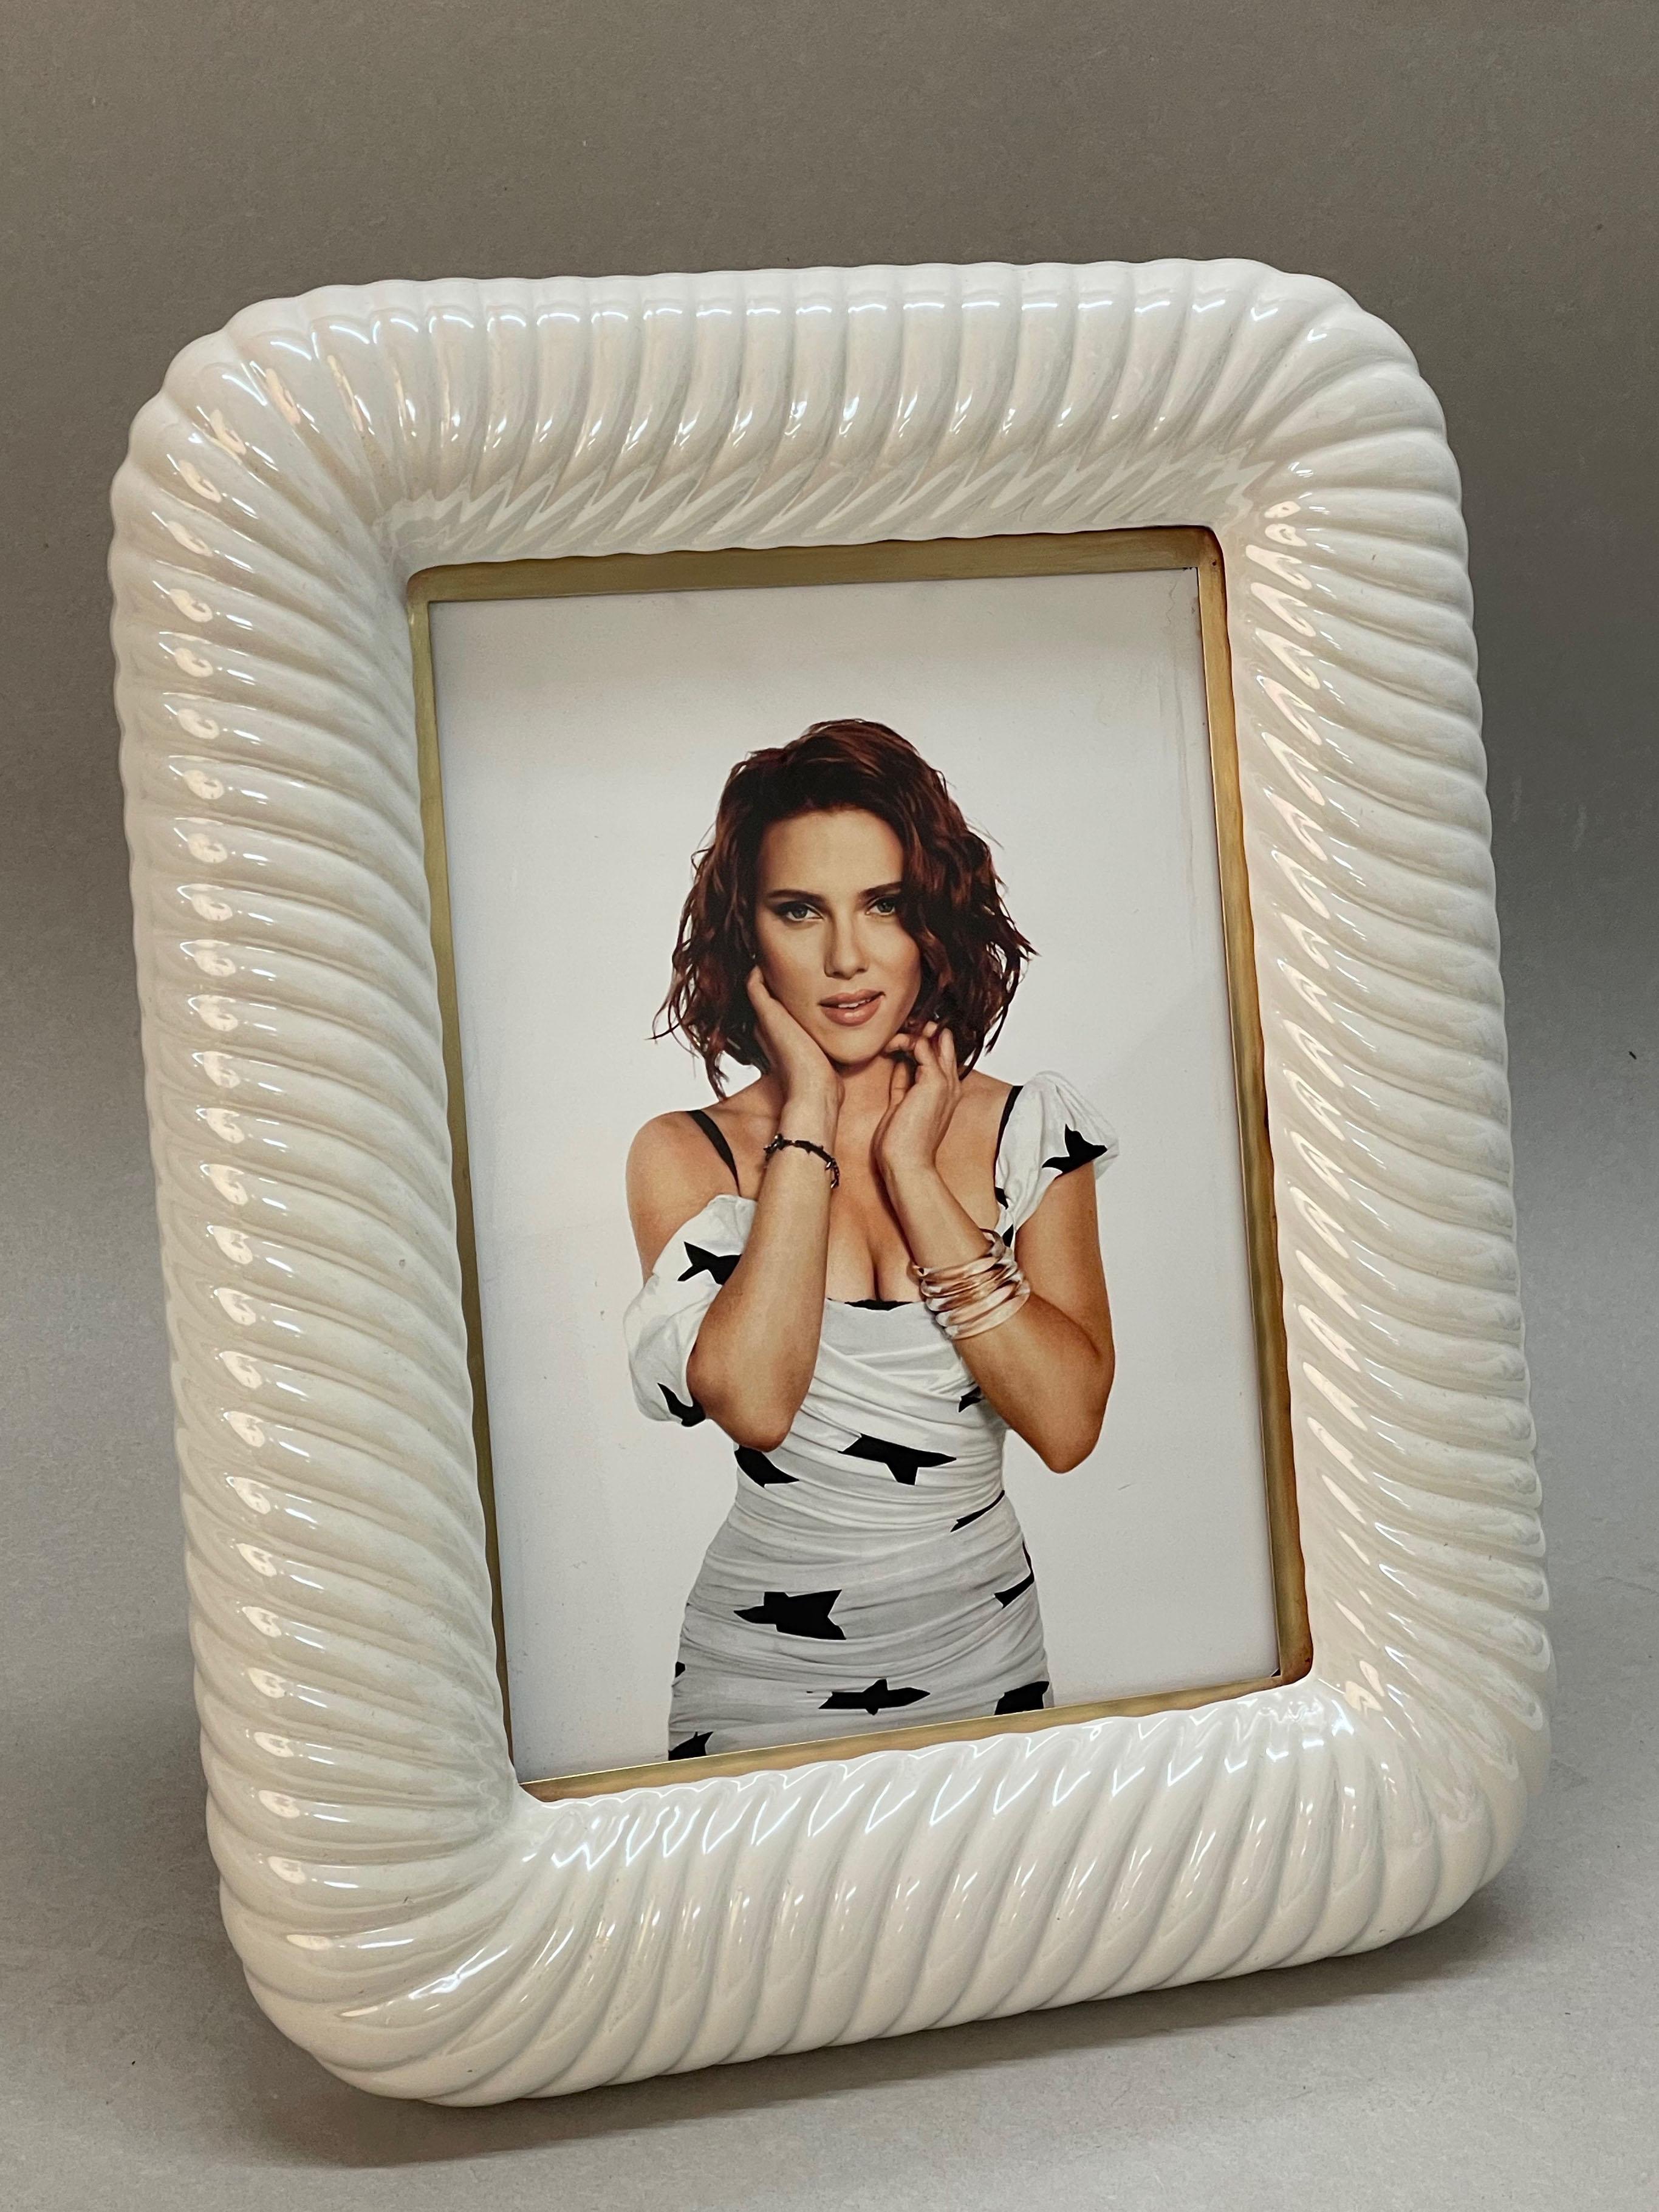 Incredible mid-century frame in white ceramic and brass. This wonderful object was designed by Tommaso Barbi, as you can see his signature on the back, in Italy in the 70s.

This piece is unique for the Fine craftsmanship on the white ceramic in